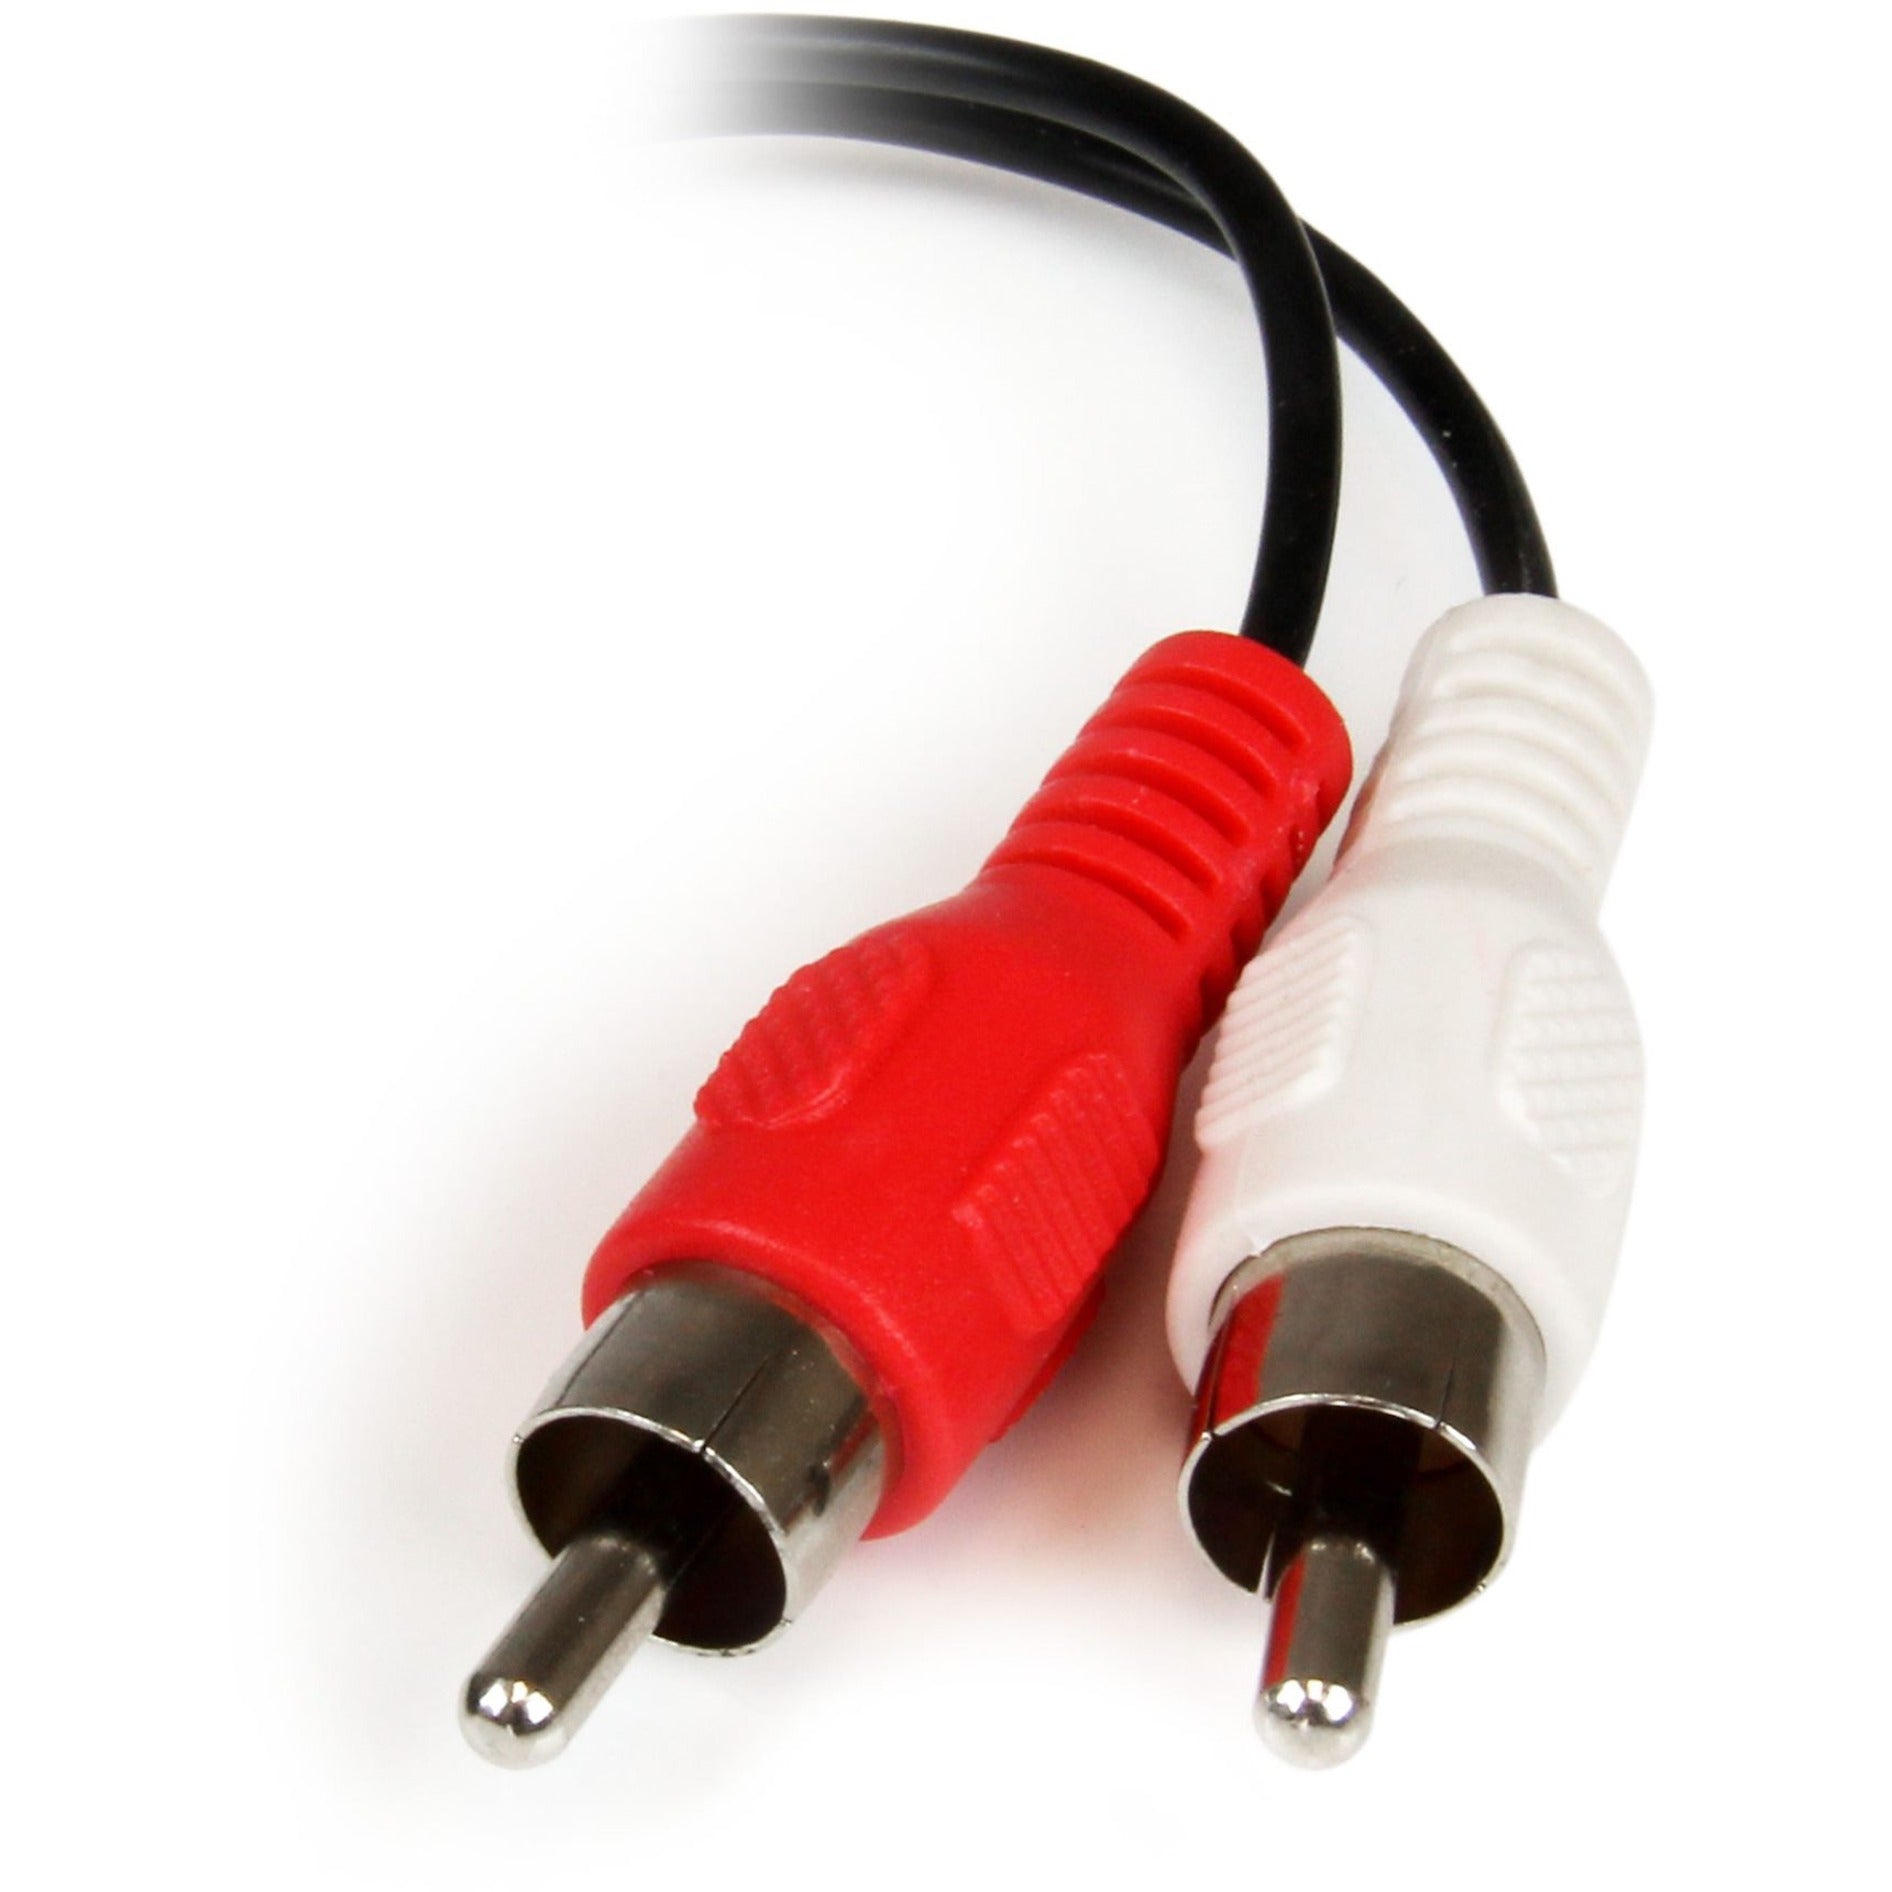 StarTech.com MUFMRCA 6in Stereo Audio Cable - Connect Your MP3 Player, iPod, or Audio Device to RCA Inputs